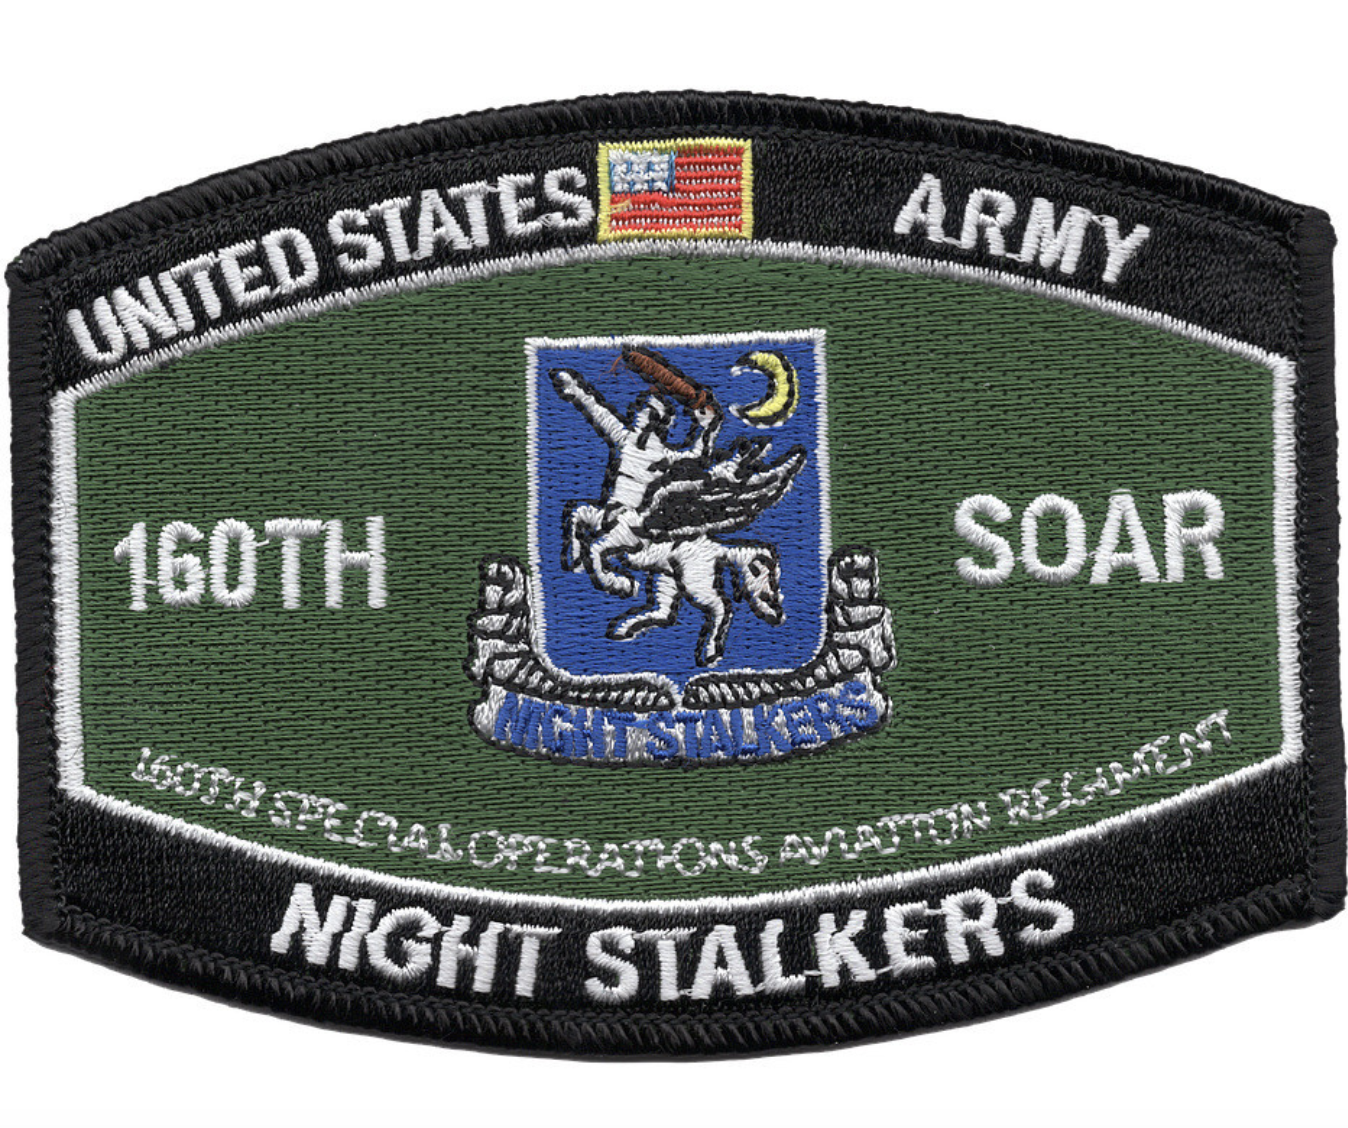 Primary image for 4.5" ARMY MOS 160TH SOAR 101ST AIRBORNE DIVISION NIG...